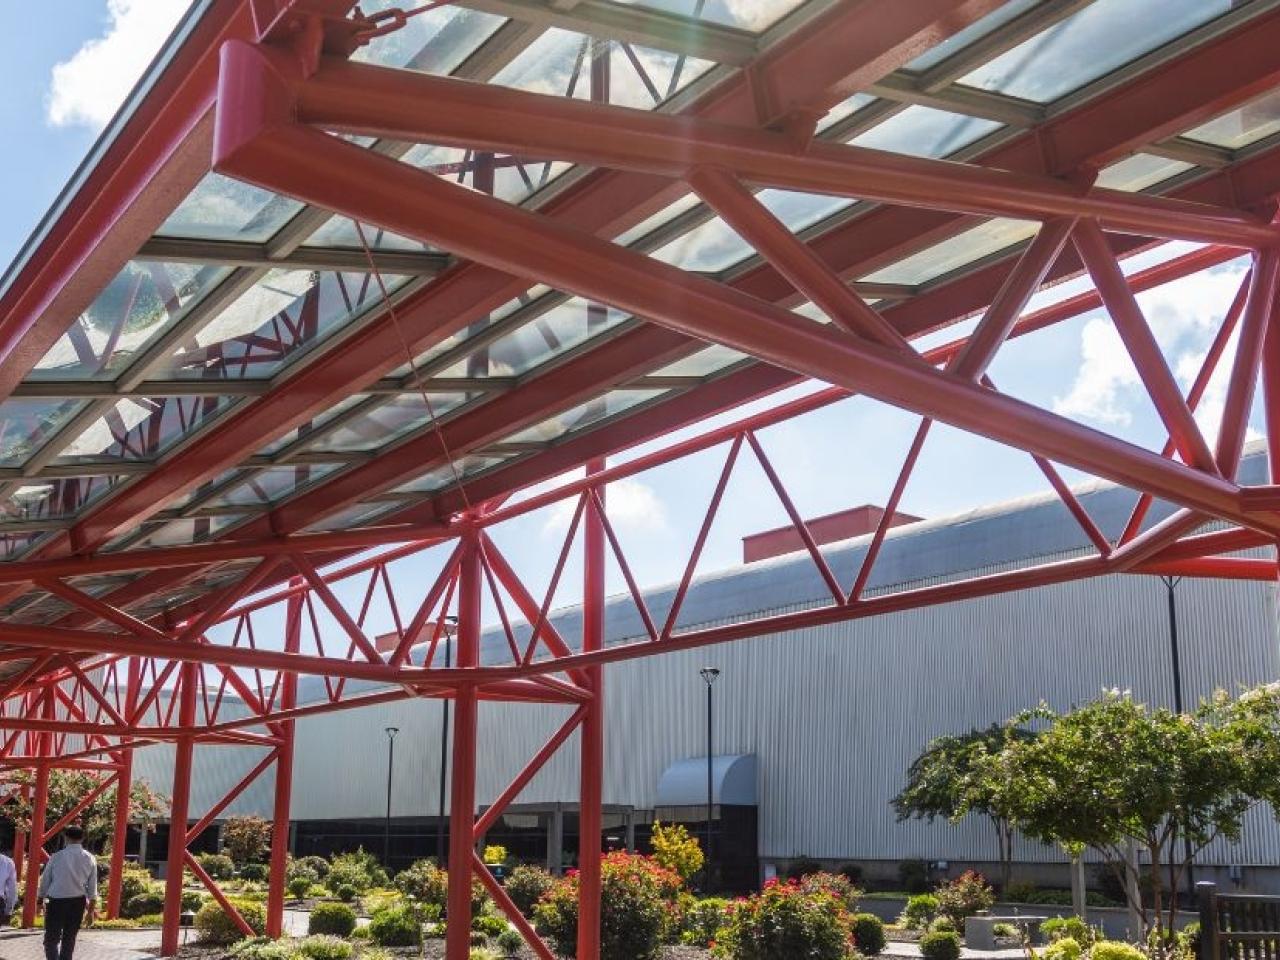 Exterior red support beams covering a walkway.